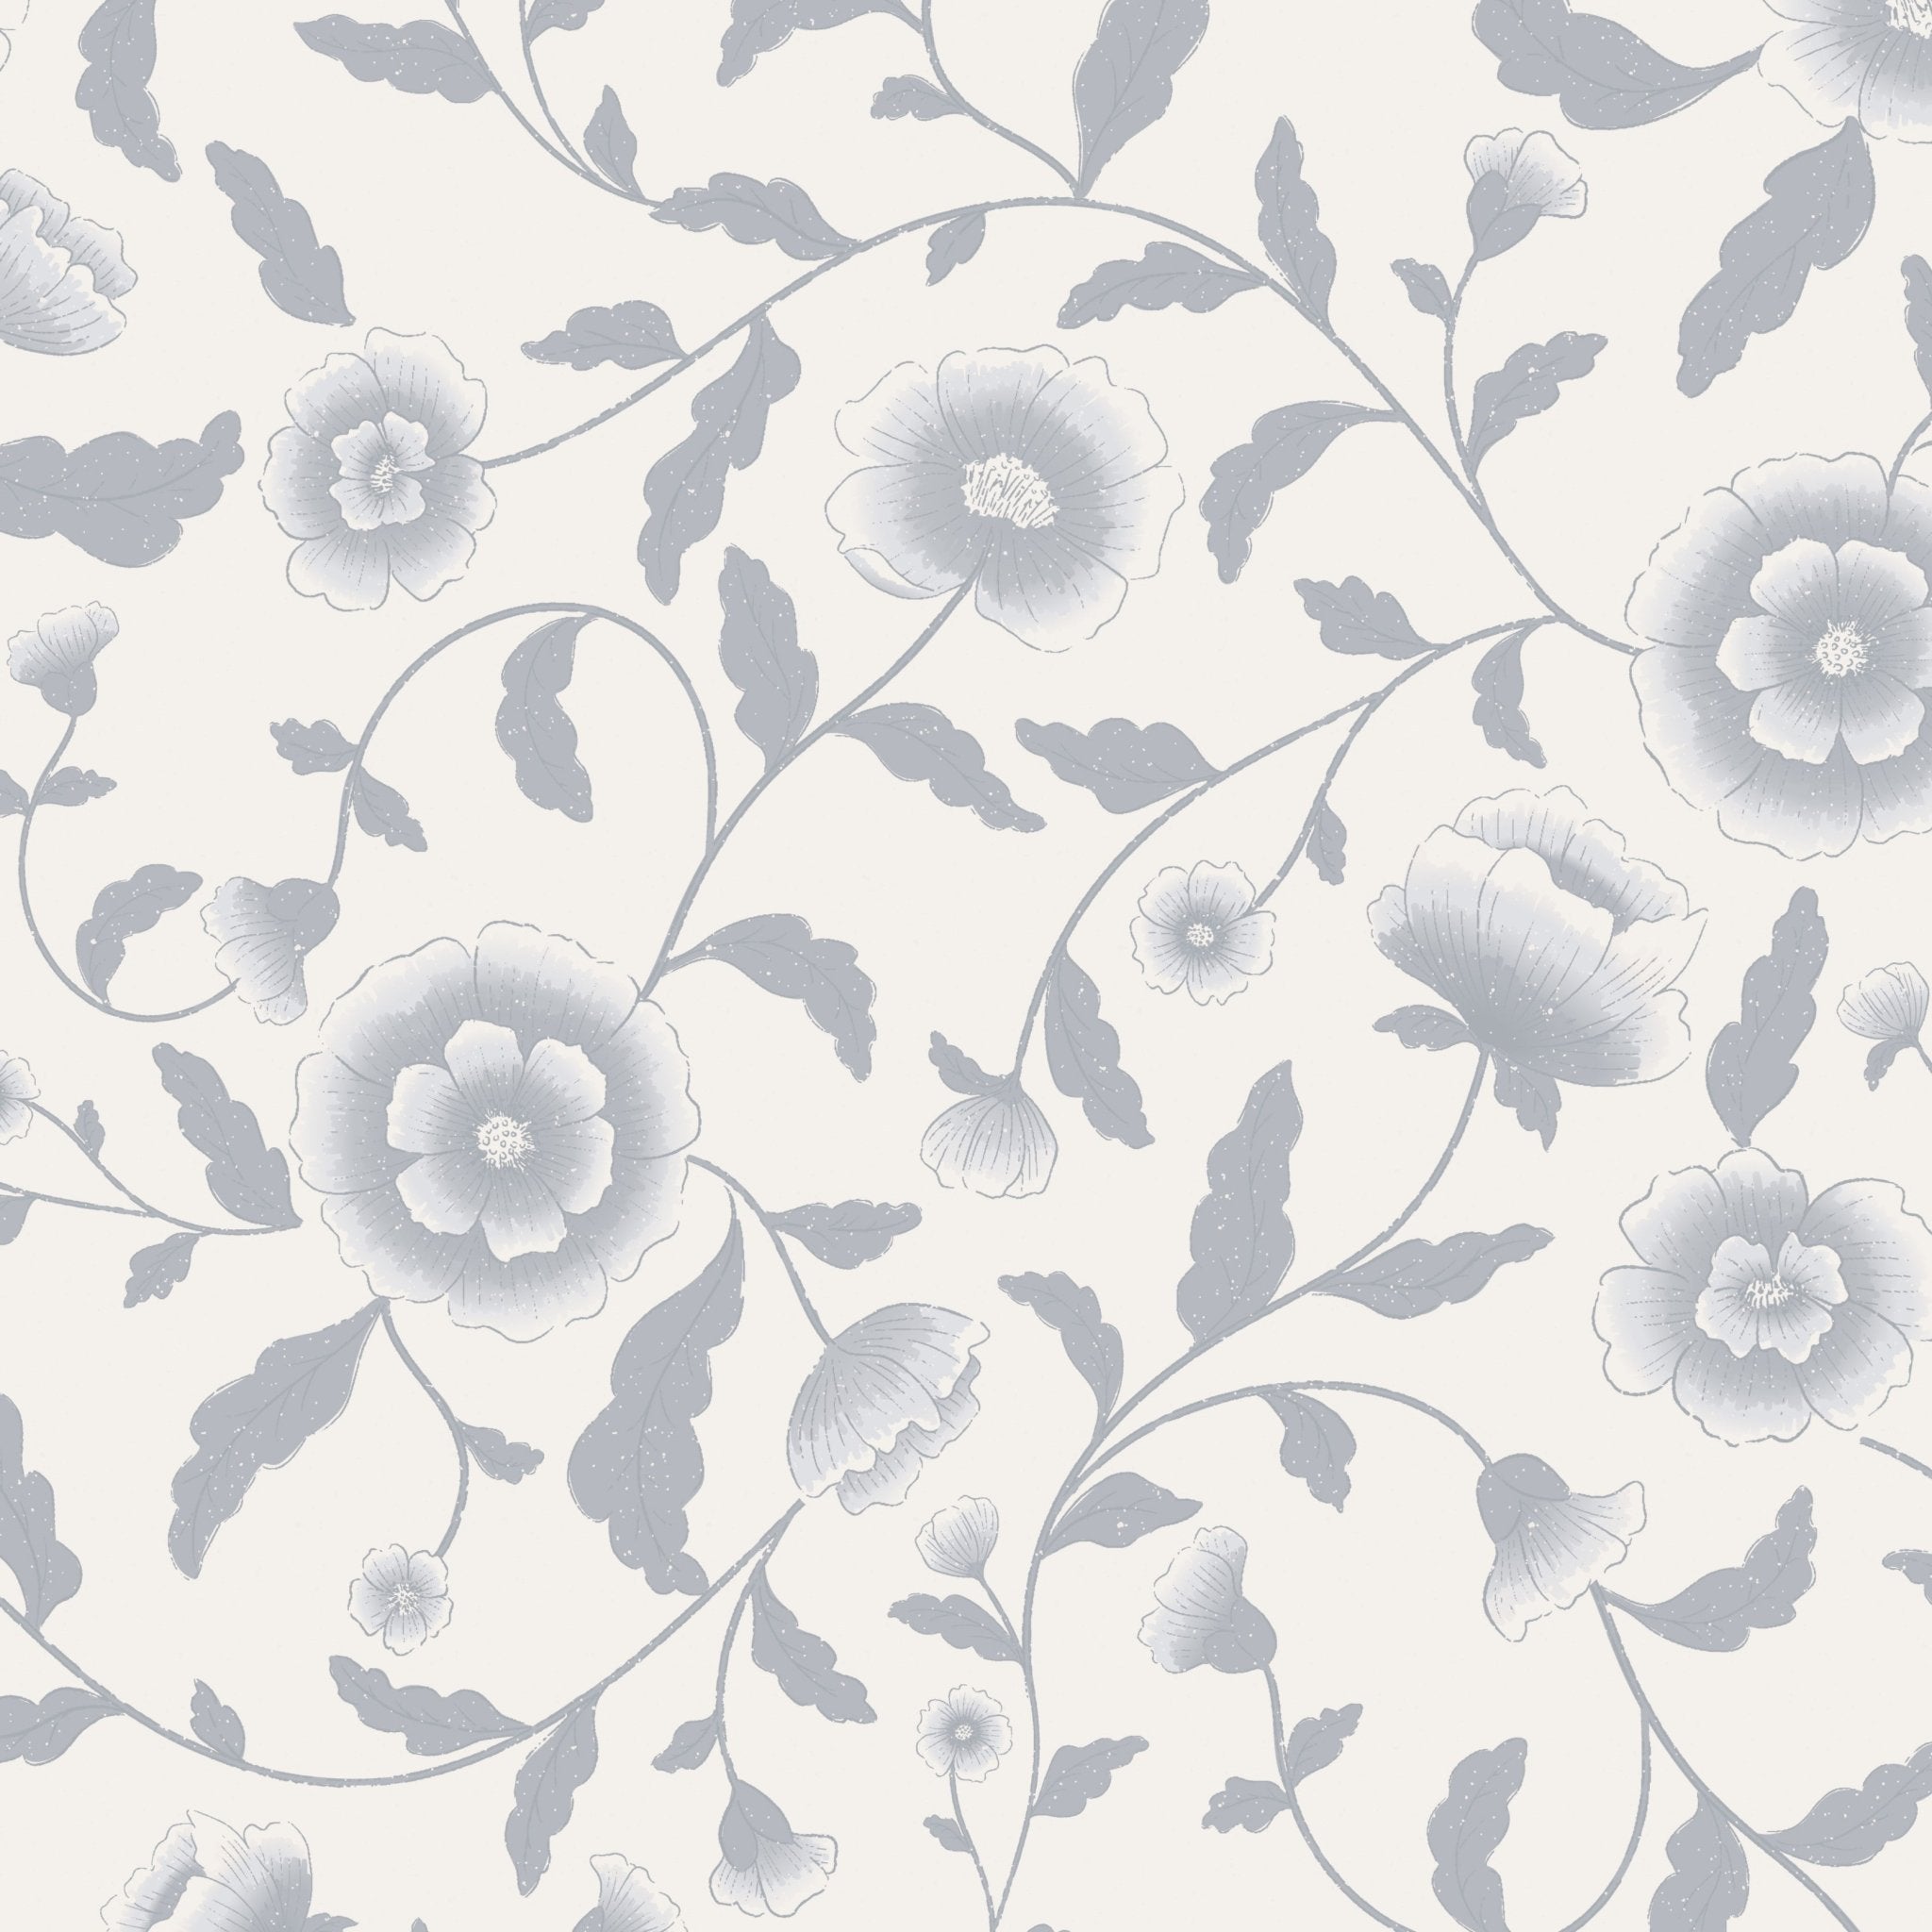 Elegant grey and white floral wallpaper design with large blooming flowers and swirling vines for a classic interior.